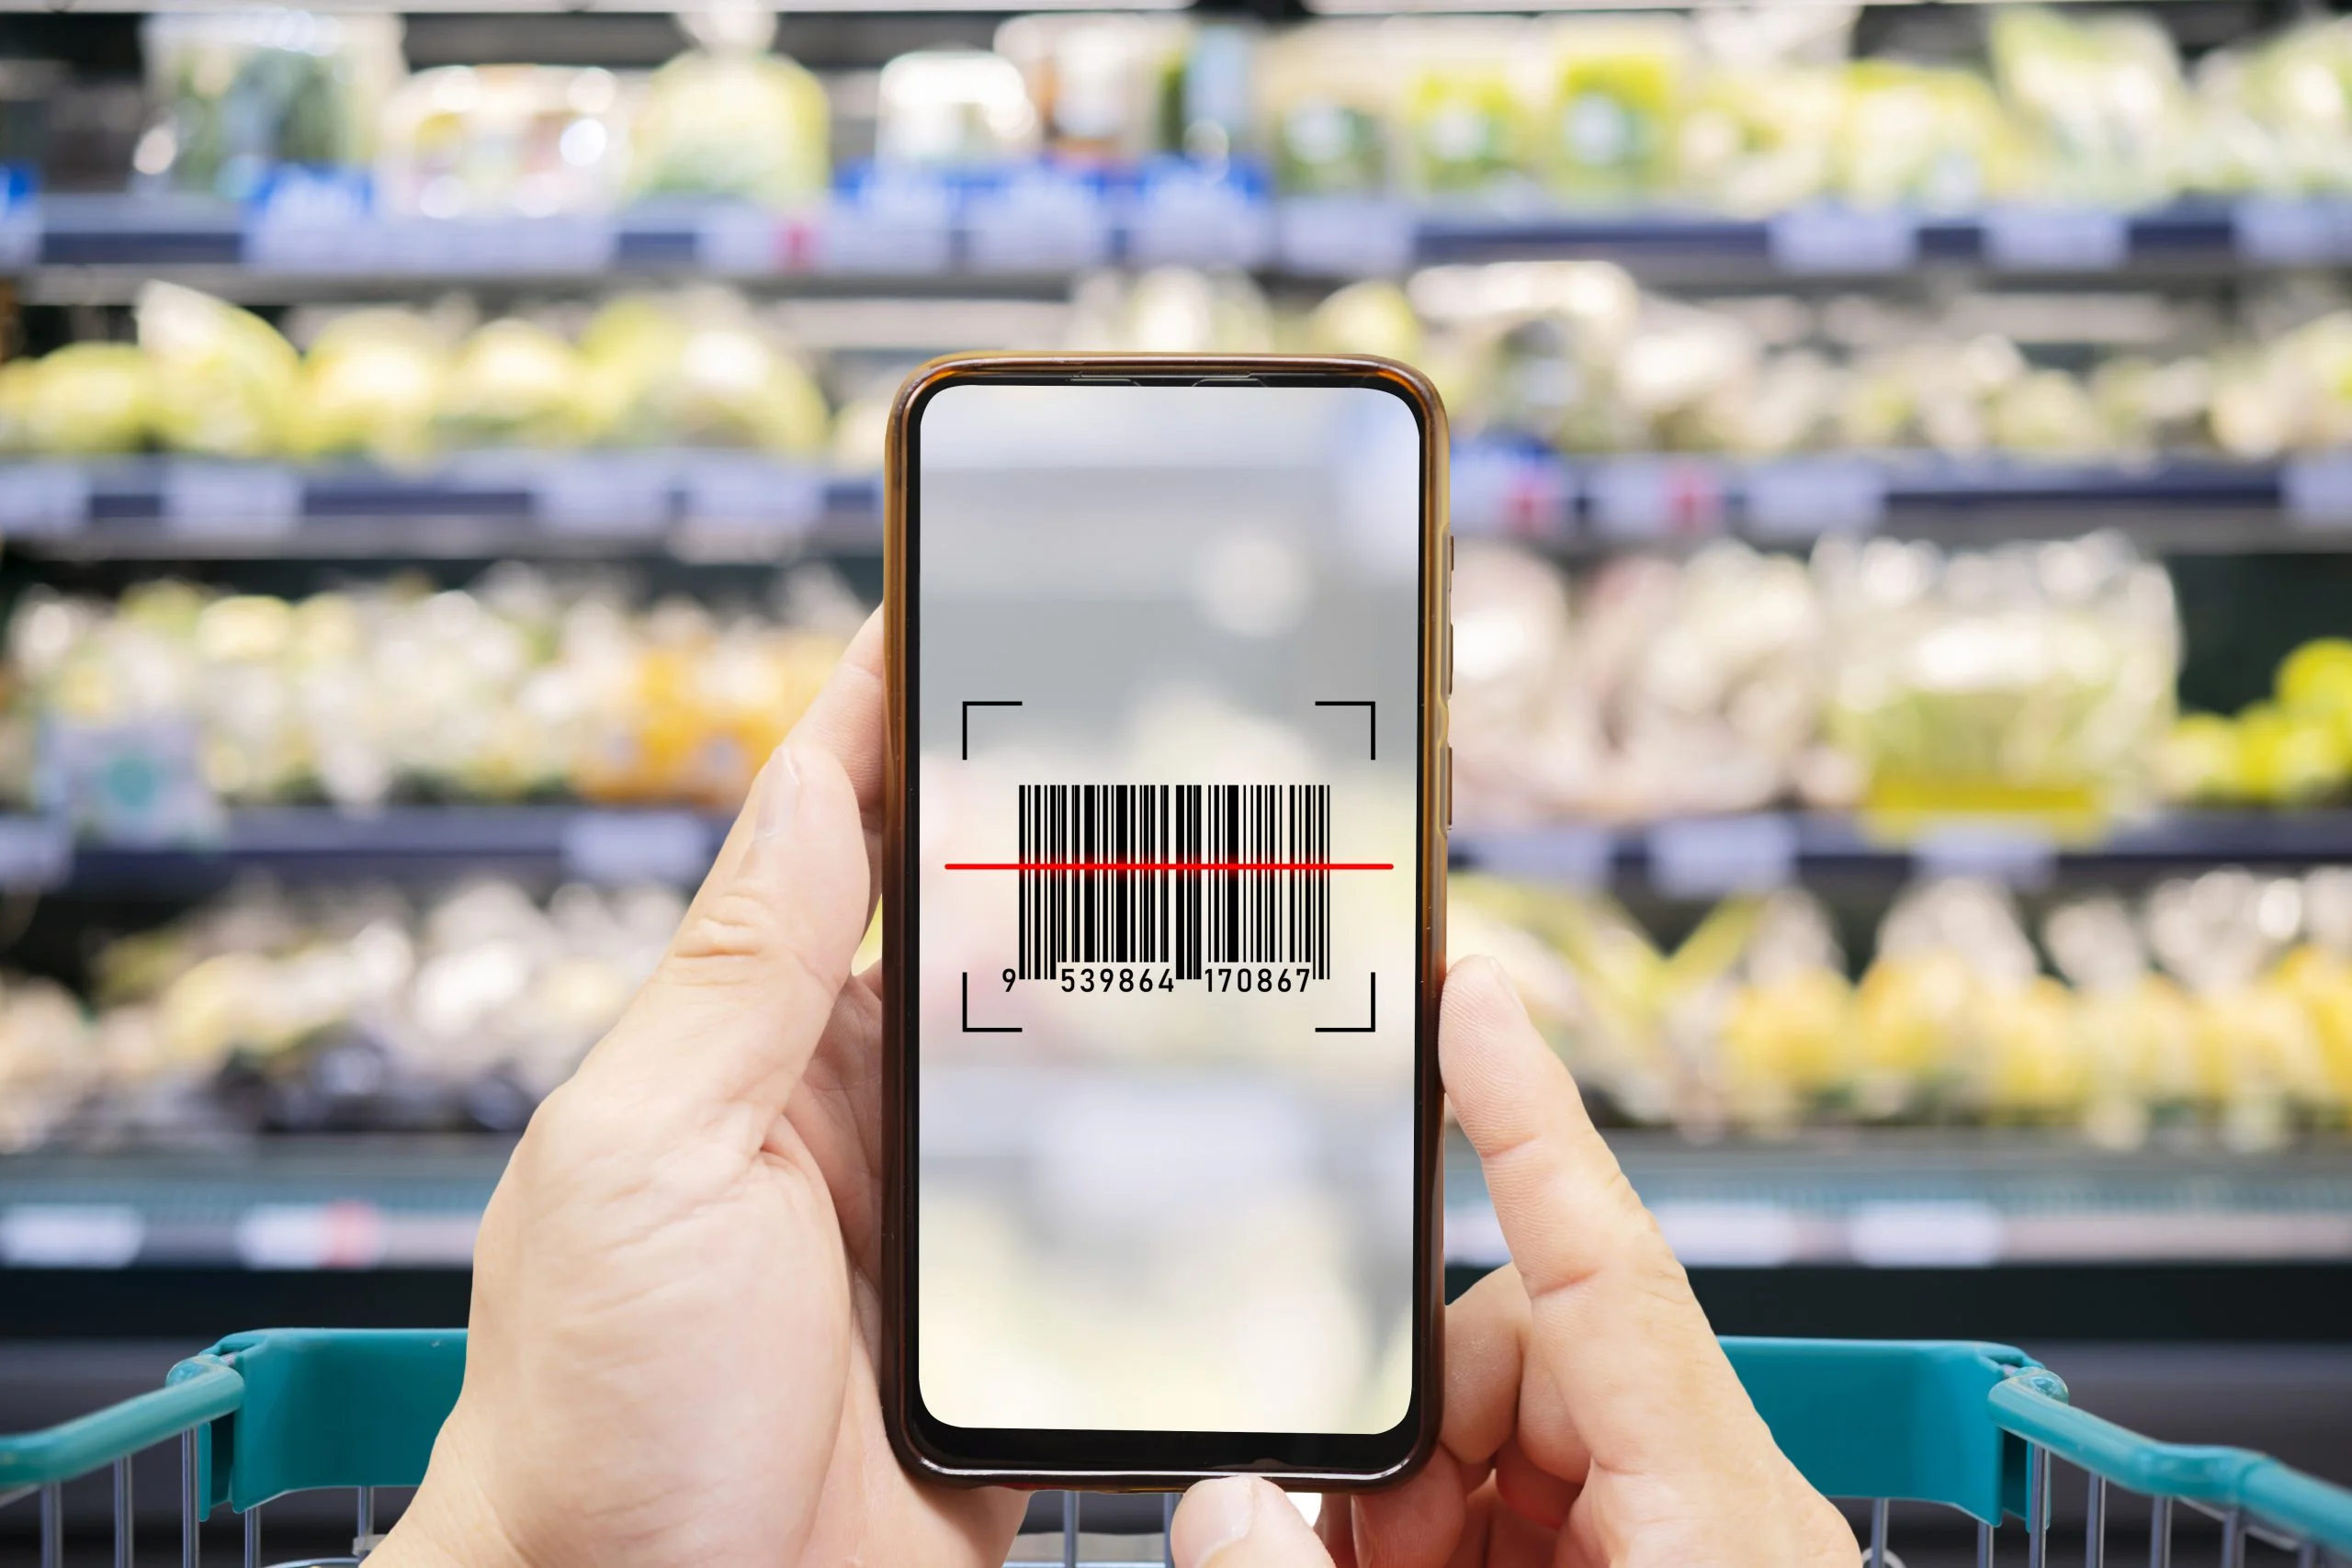 smart retail conceptfemale hands using barcode scan information product supermarket scaled 1